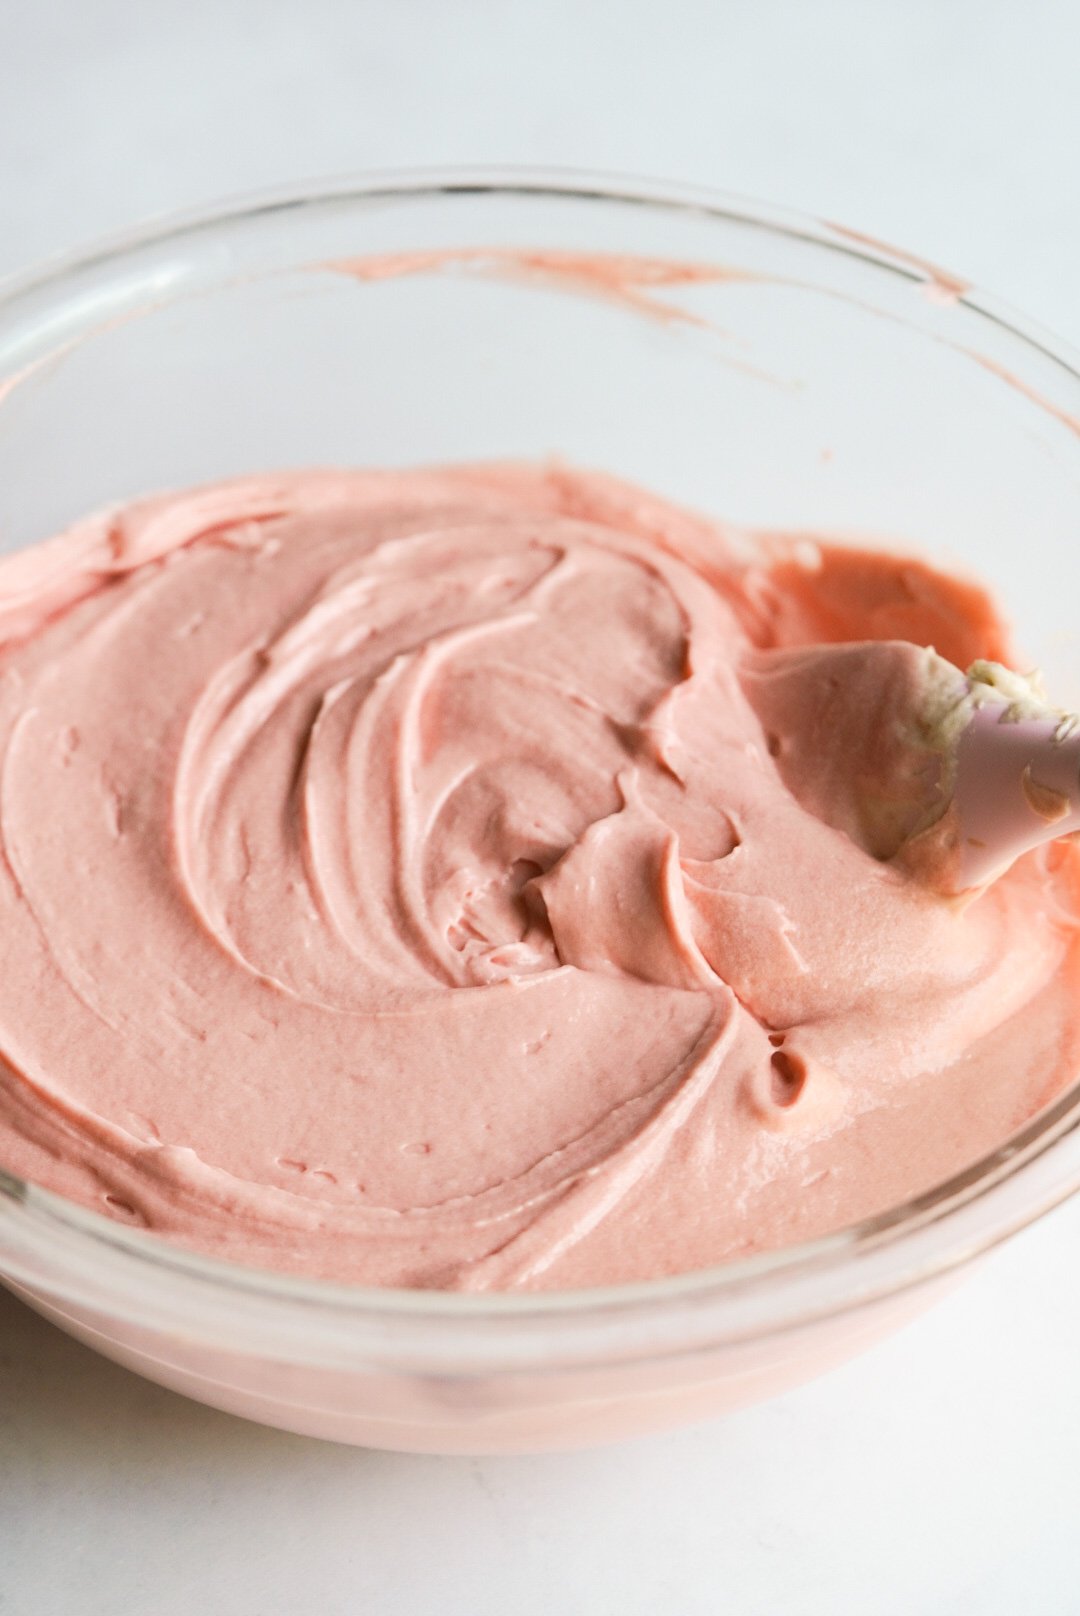 strawberry cake batter with pink color